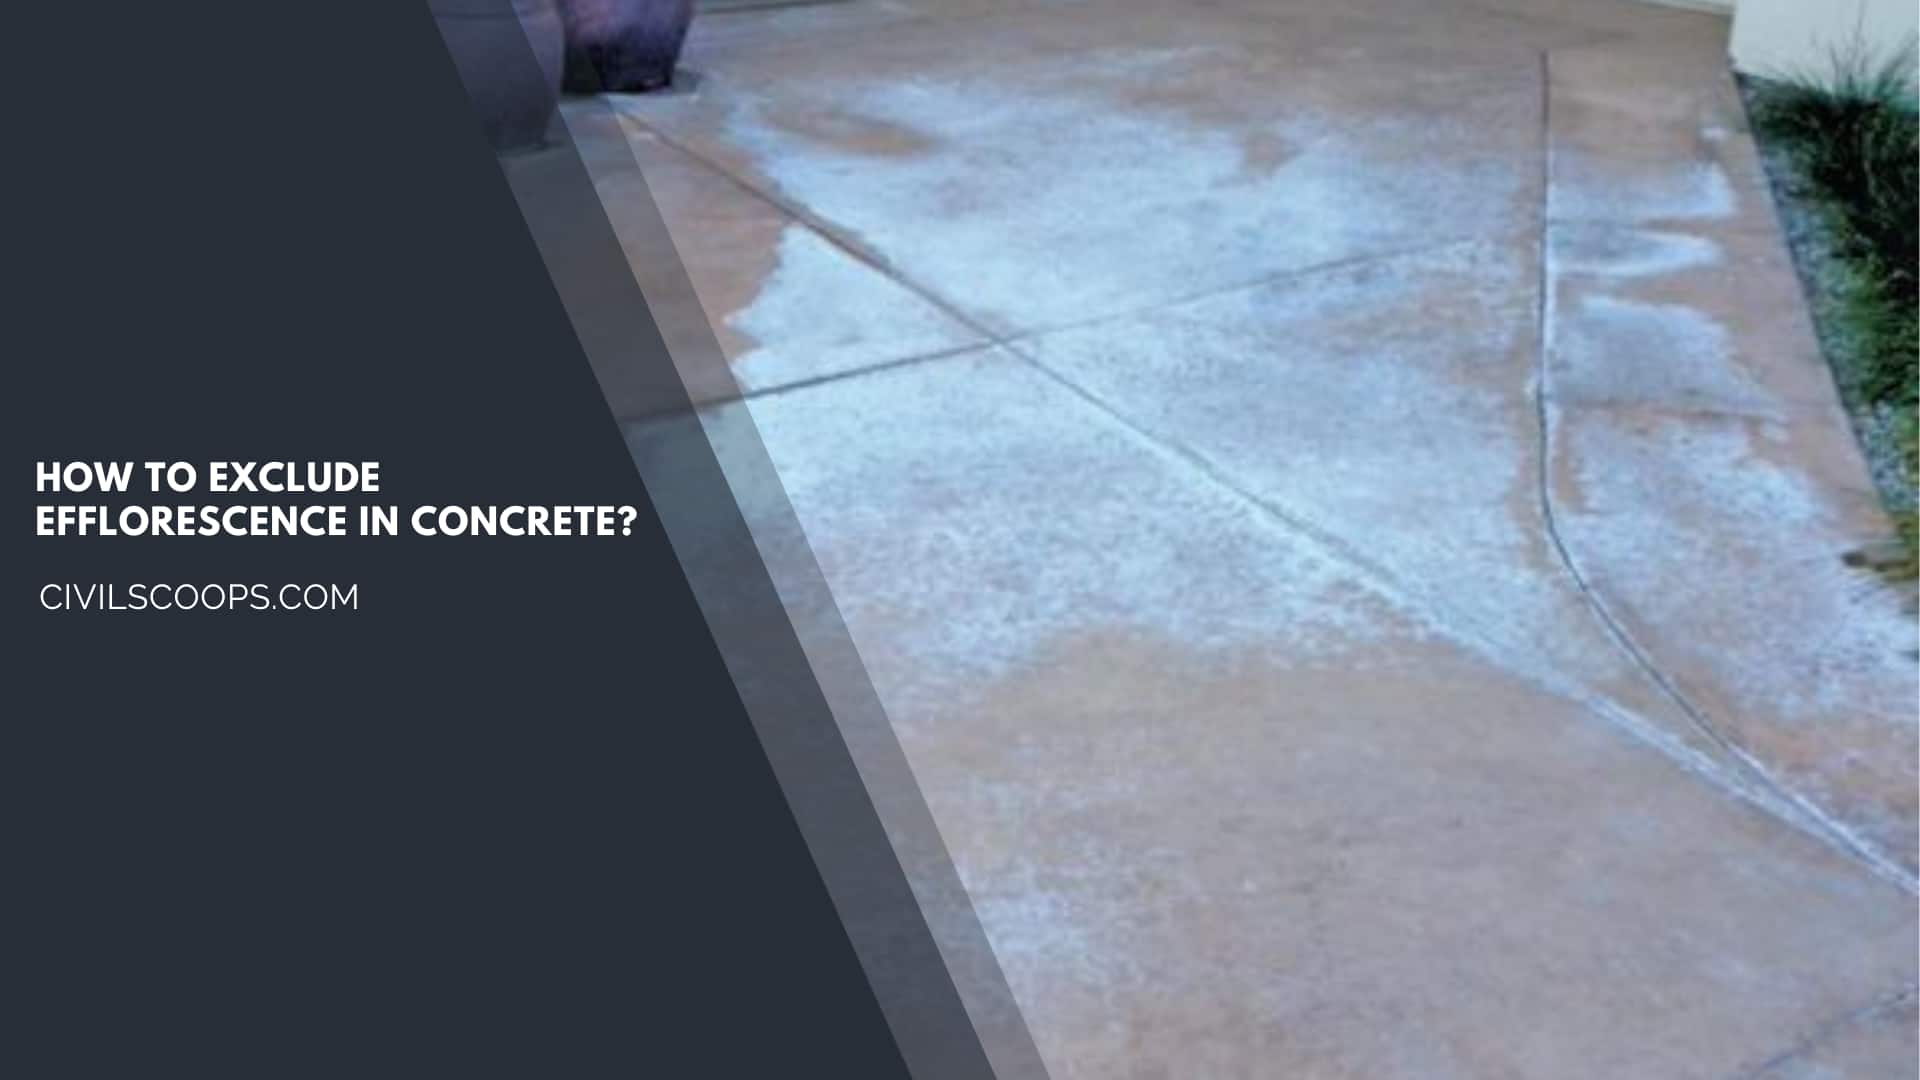 How to Exclude Efflorescence in Concrete